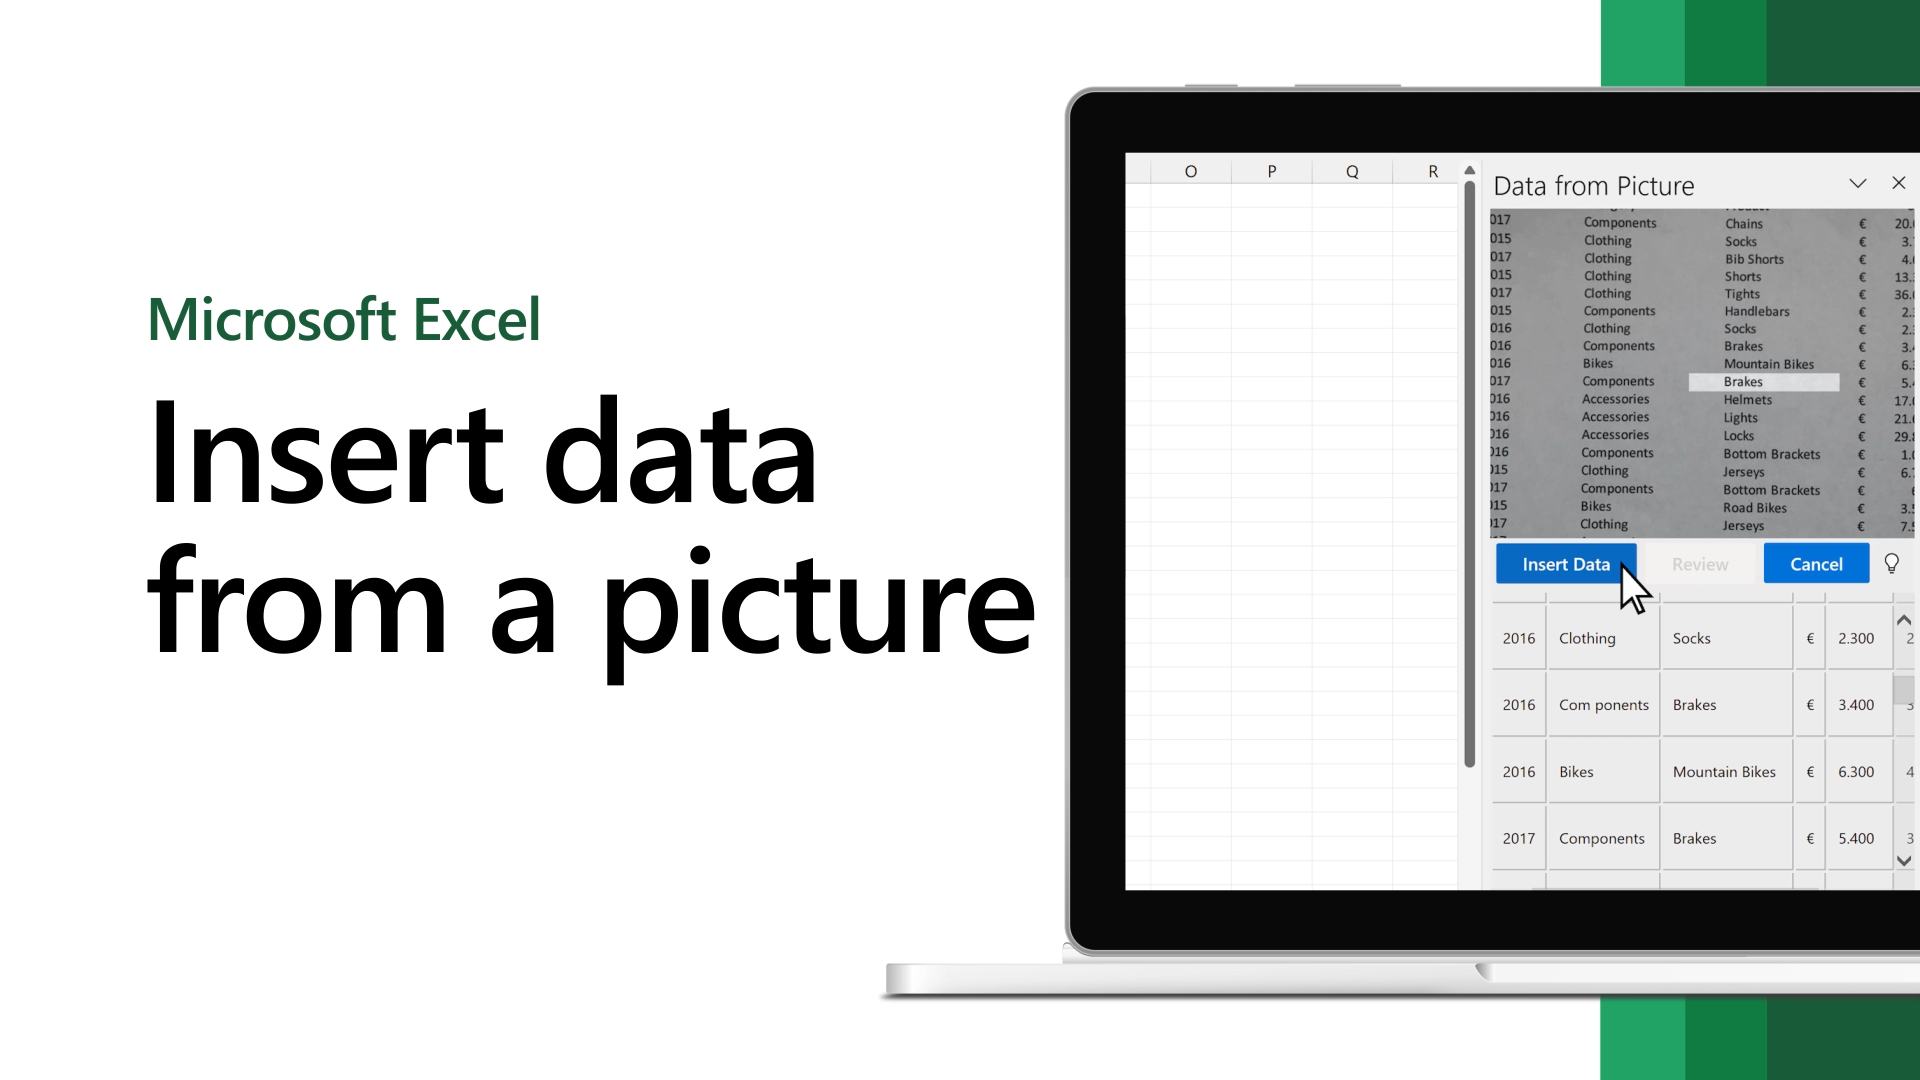 Can we extract data from a photo?